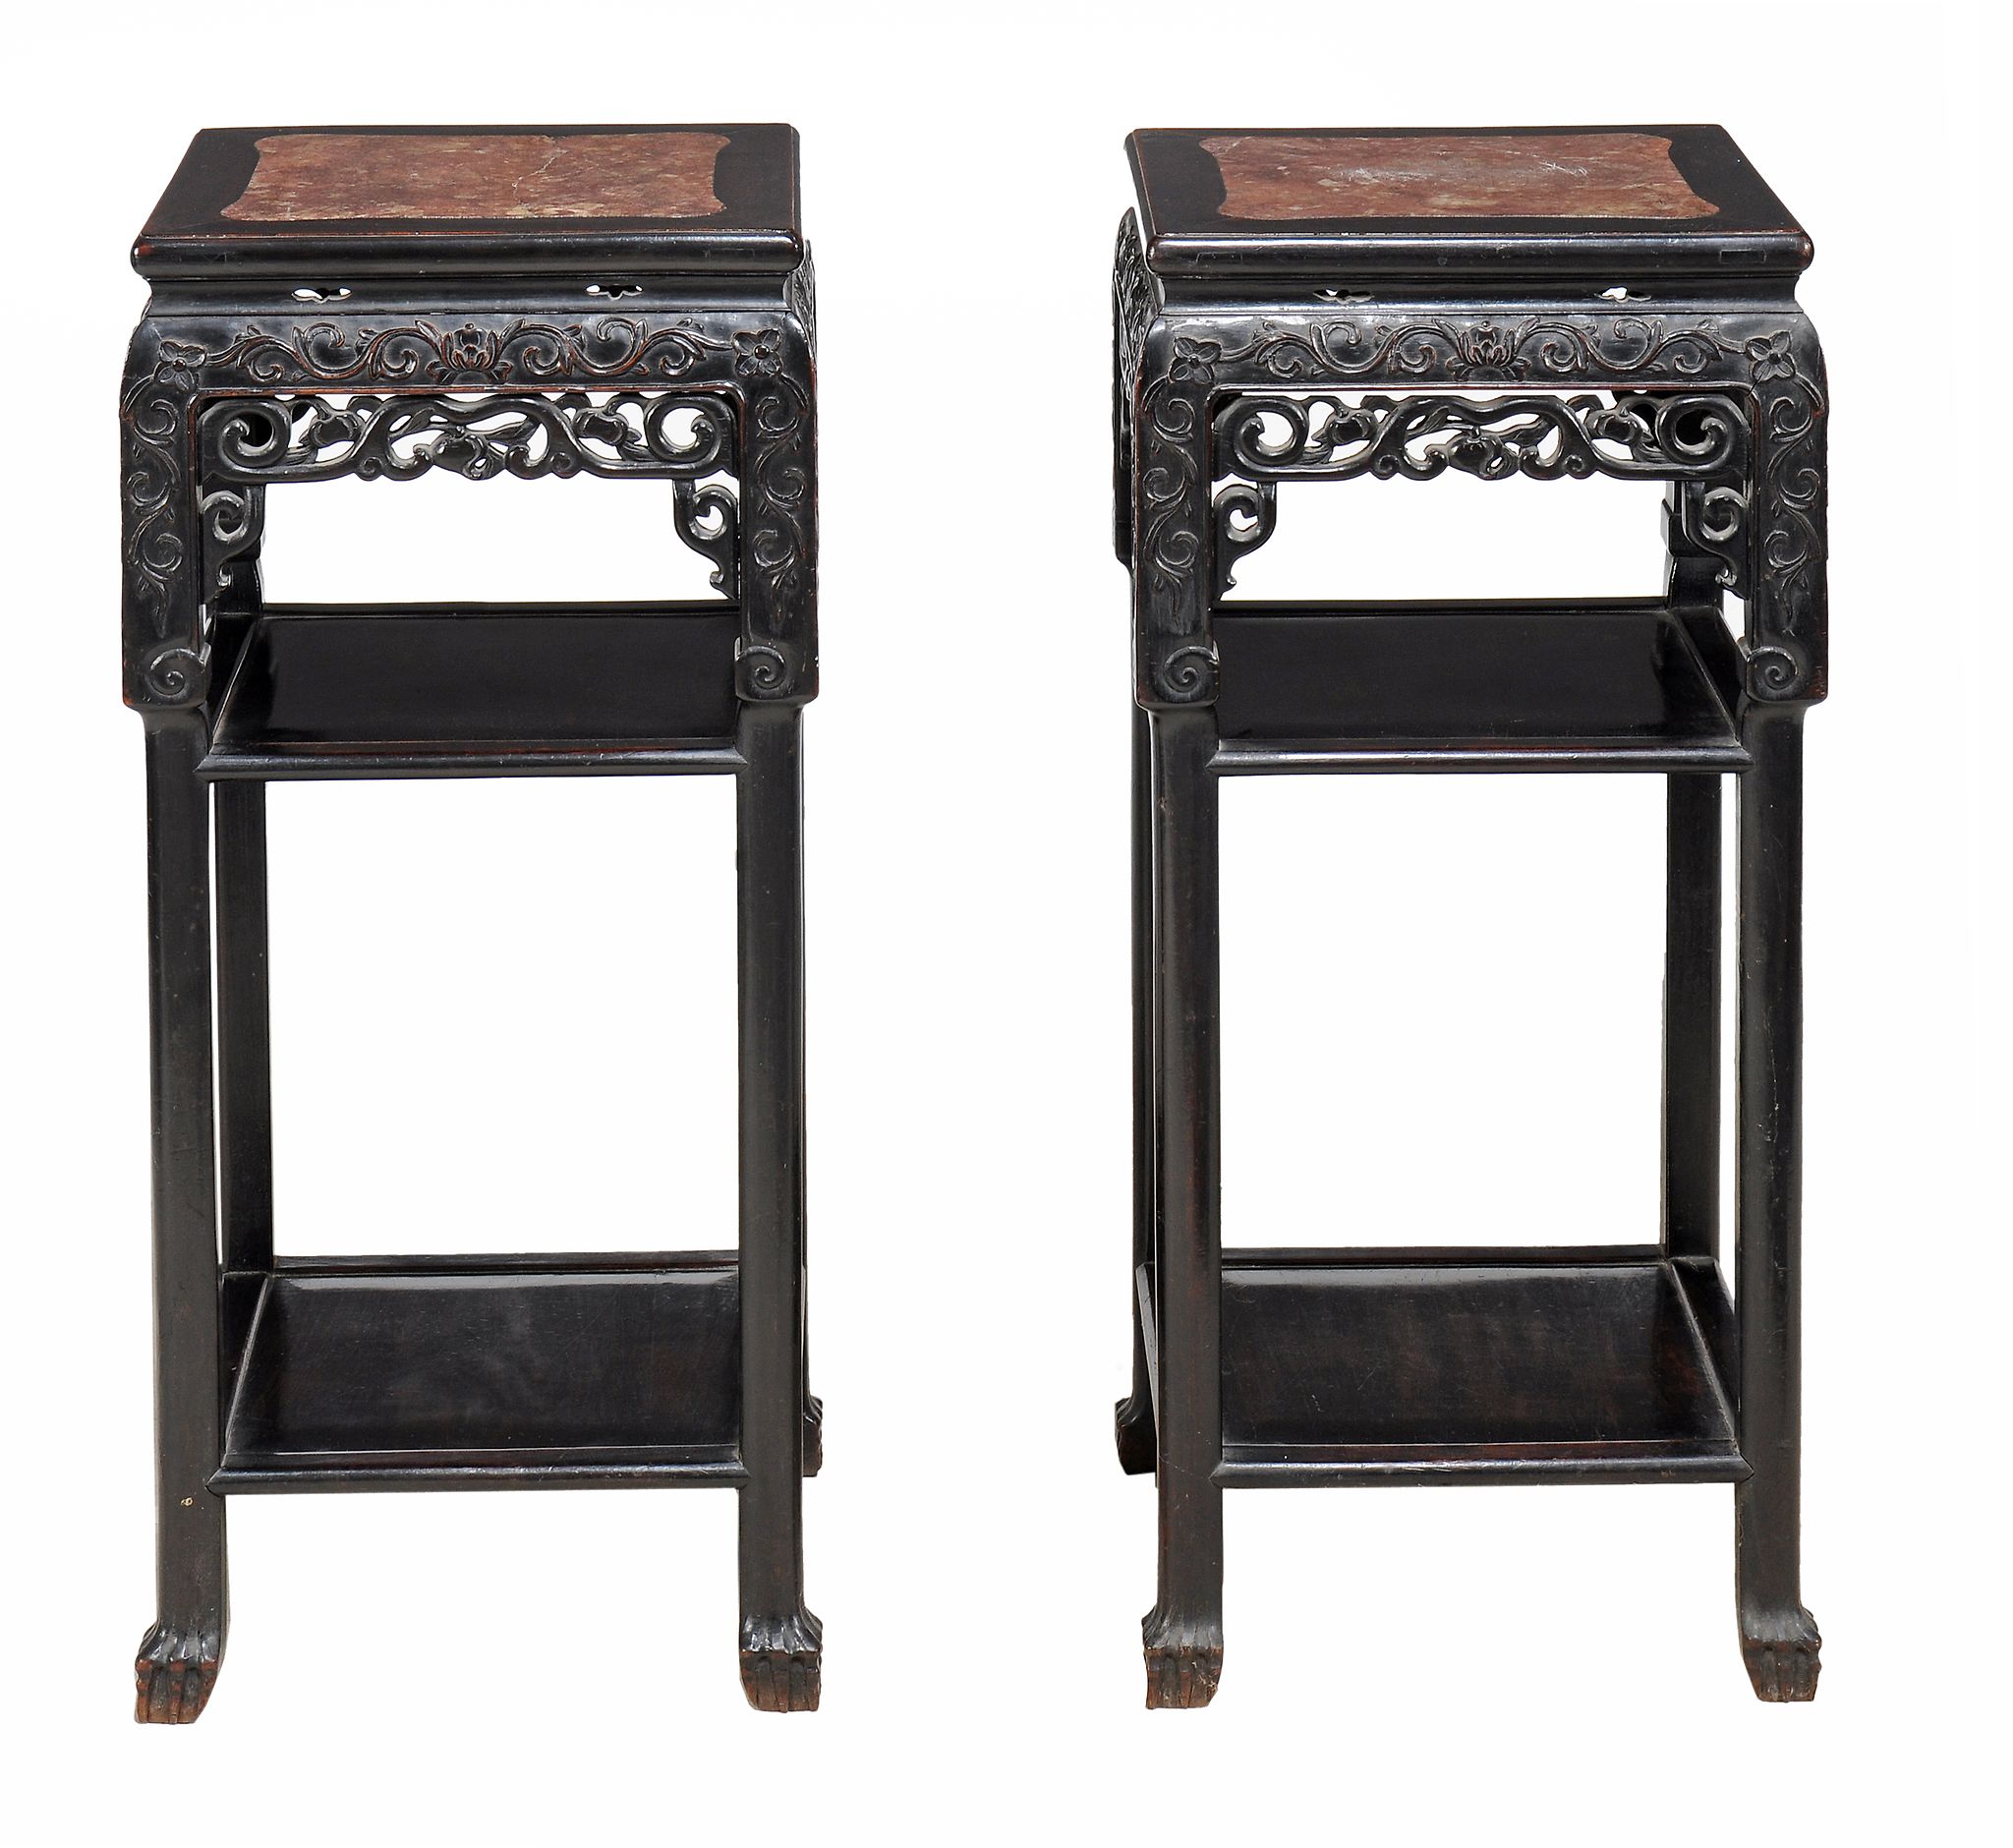 A pair of Chinese hardwood marble inset stands, late Qing A pair of Chinese hardwood marble inset